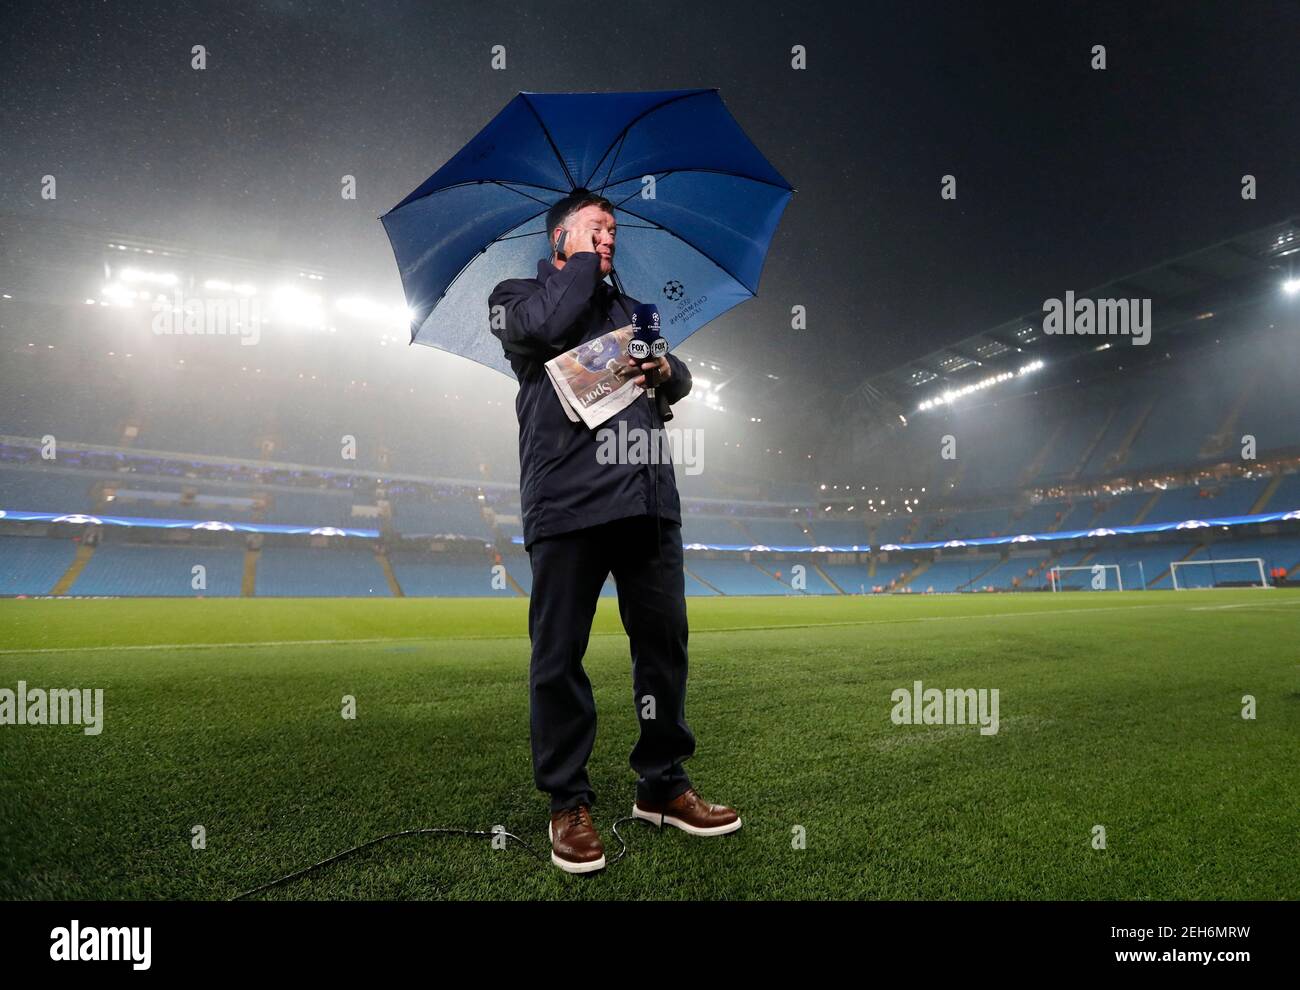 Football Soccer Britain - Manchester City v Borussia Monchengladbach - UEFA Champions  League Group Stage - Group C - Etihad Stadium, Manchester, England -  13/9/16 TV Presenter Geoff Shreeves during a storm